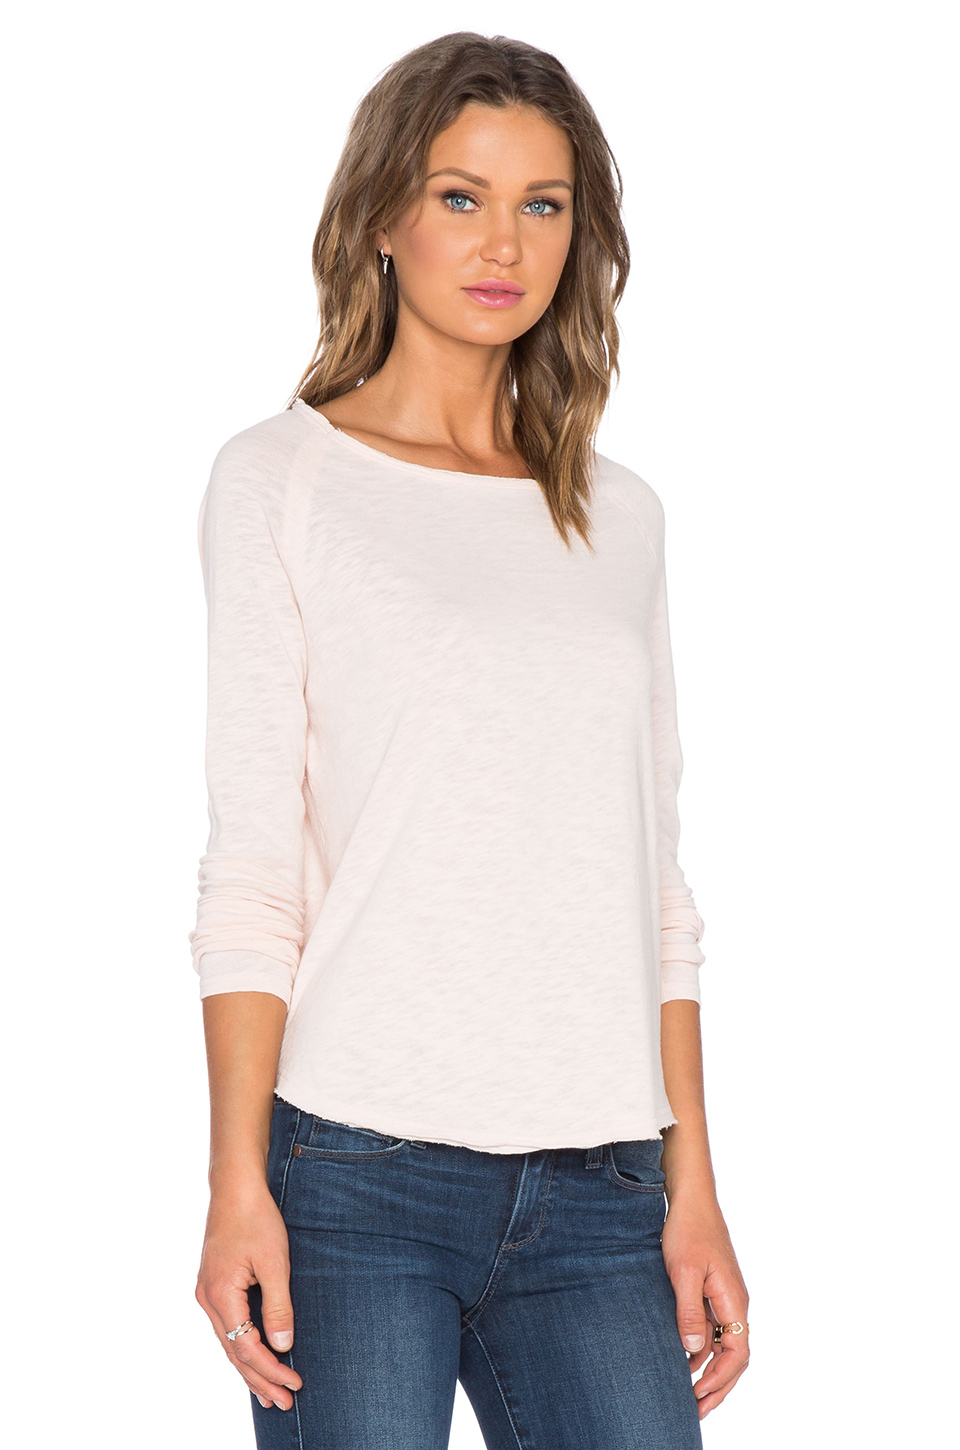 Lyst - American vintage Sonoma Cotton Top in White